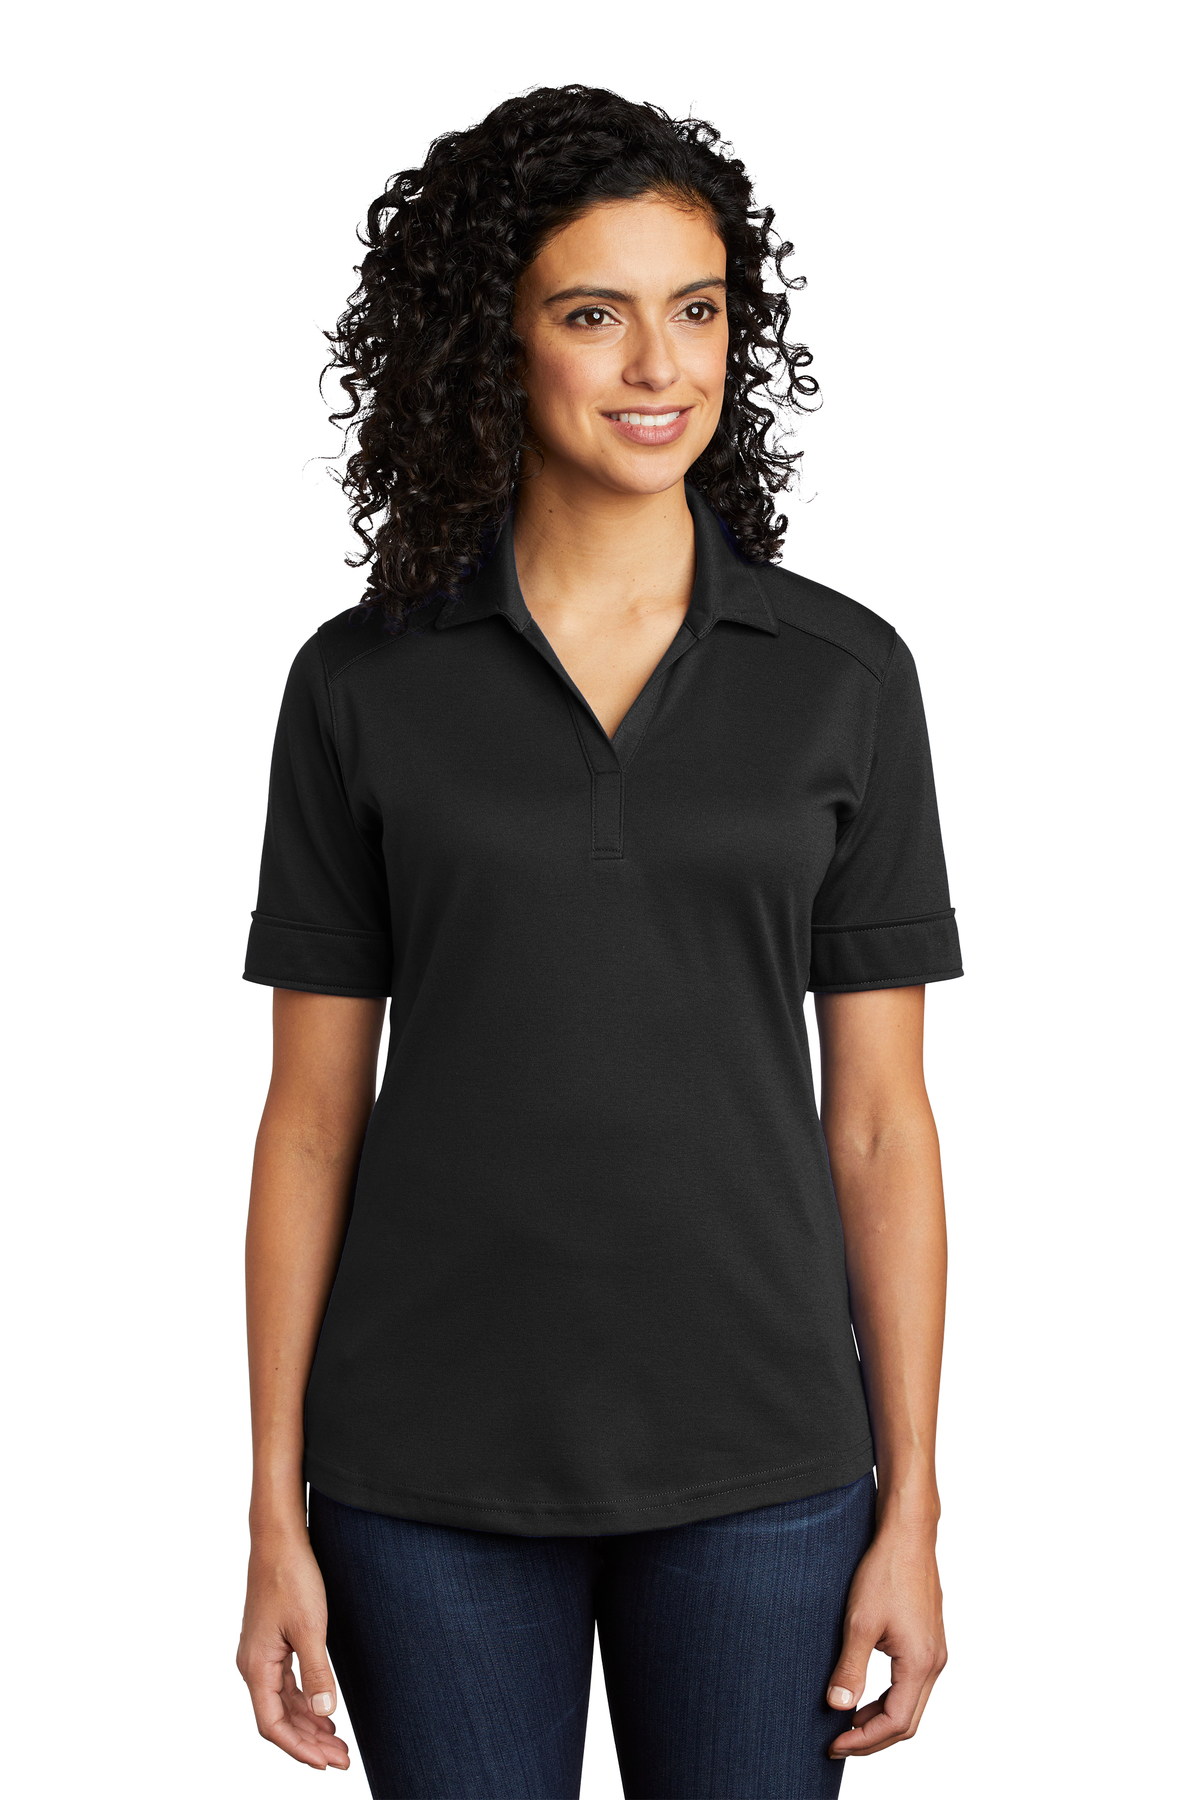 Port Authority Ladies Silk Touch Interlock Performance Polo | Product ...